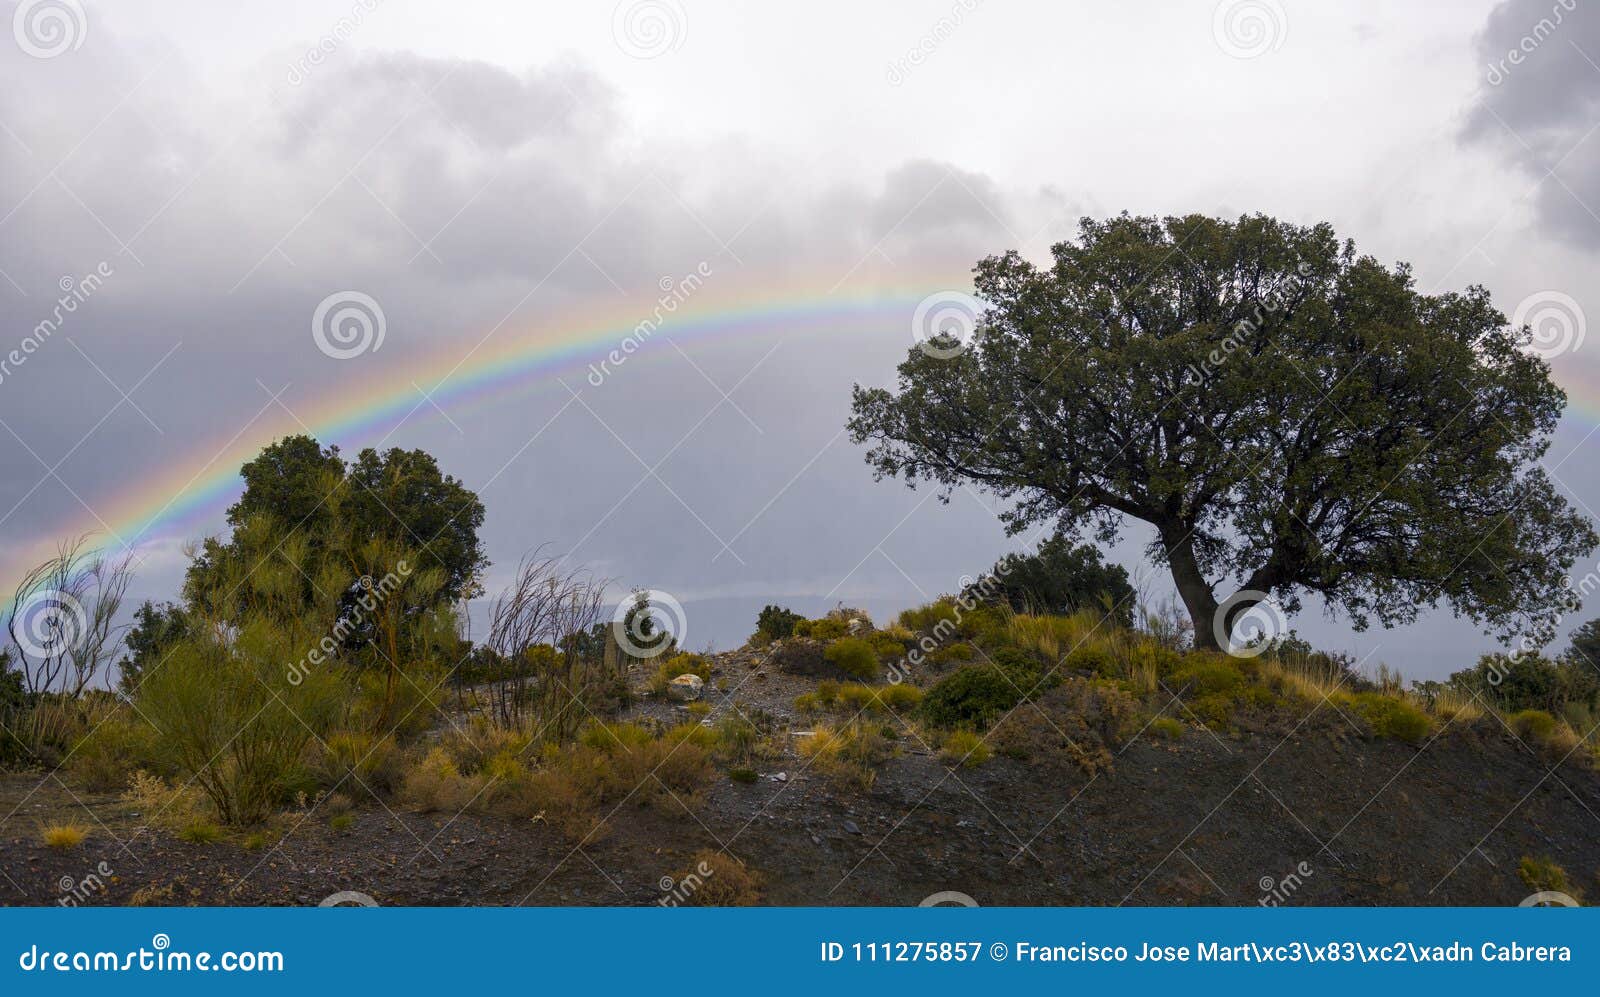 tree on the hill with the rainbow behind, beauty in abundance